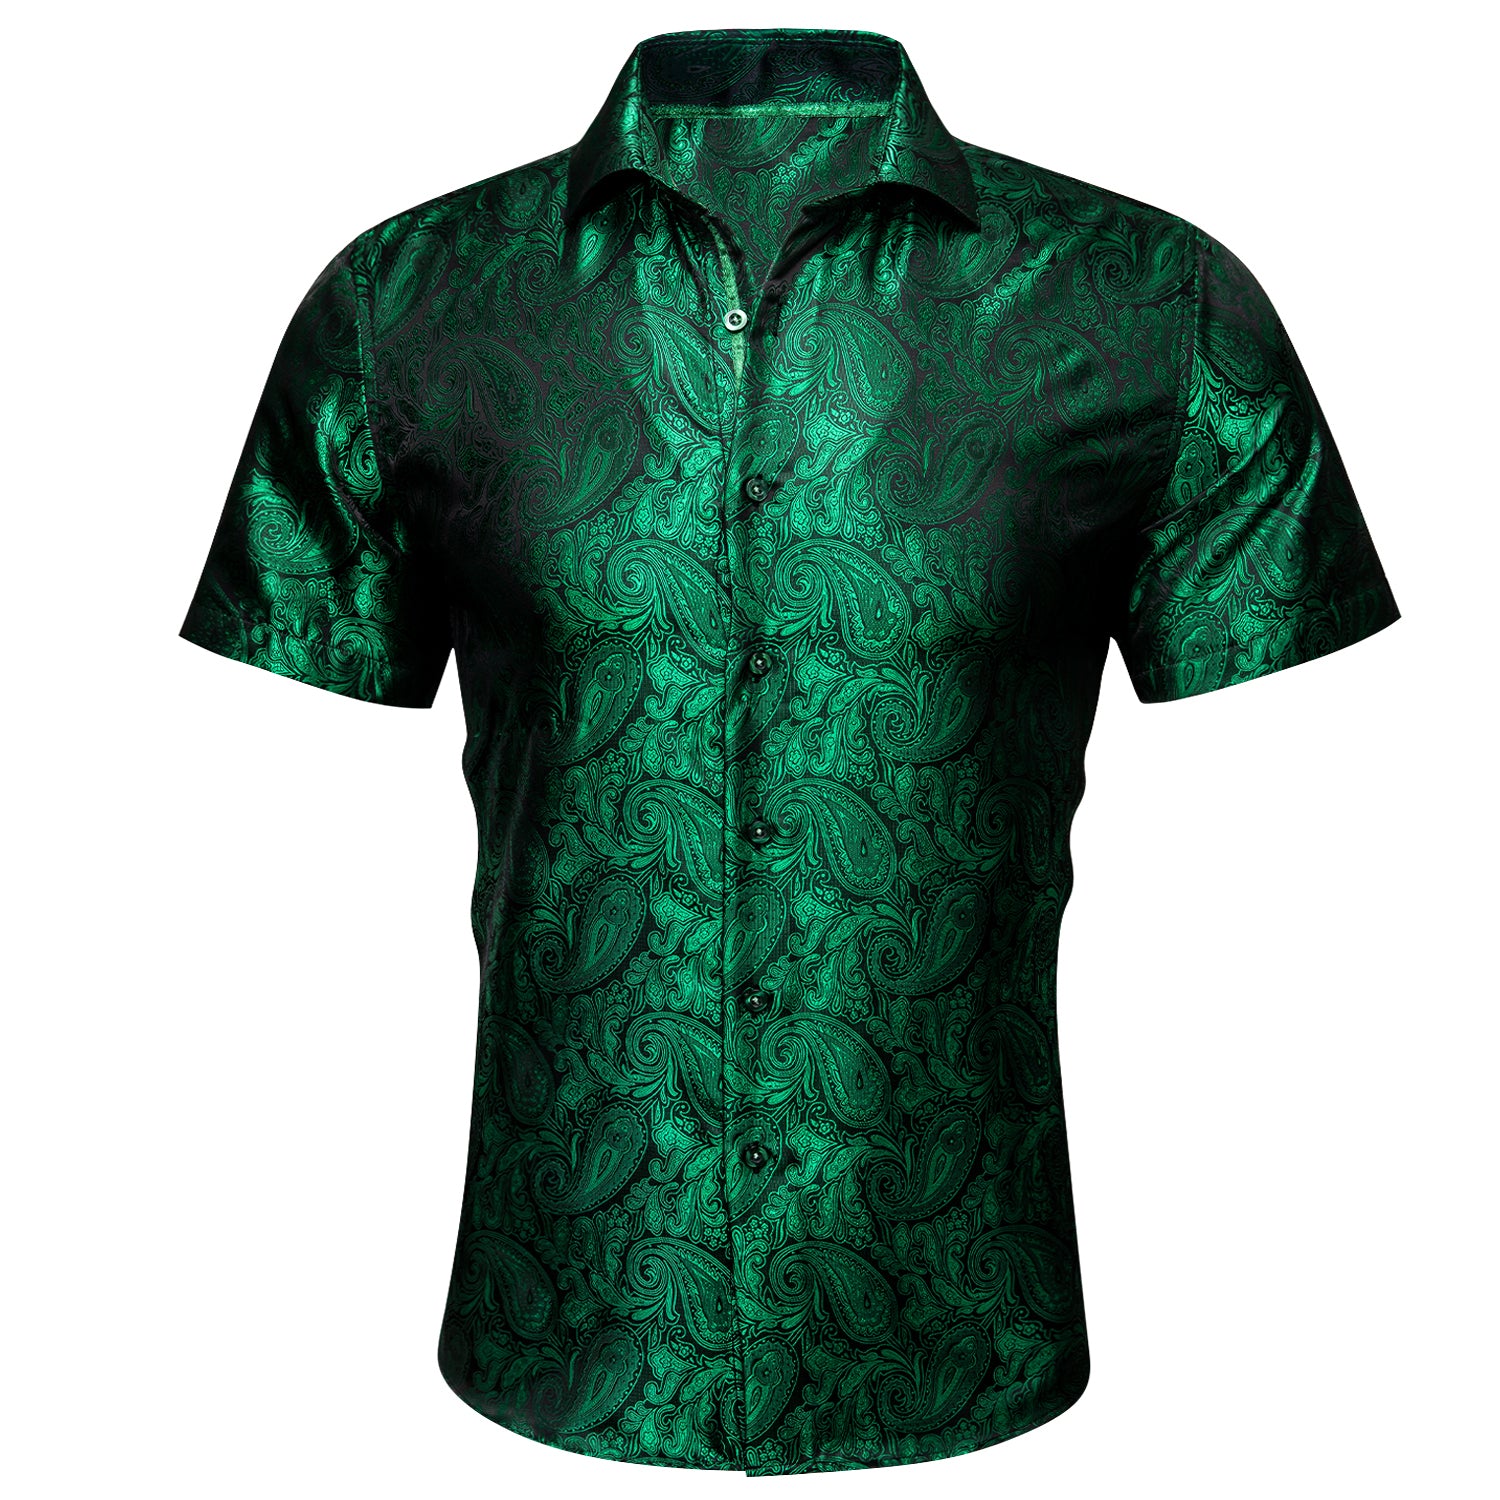 men's shirts fitted green shirts